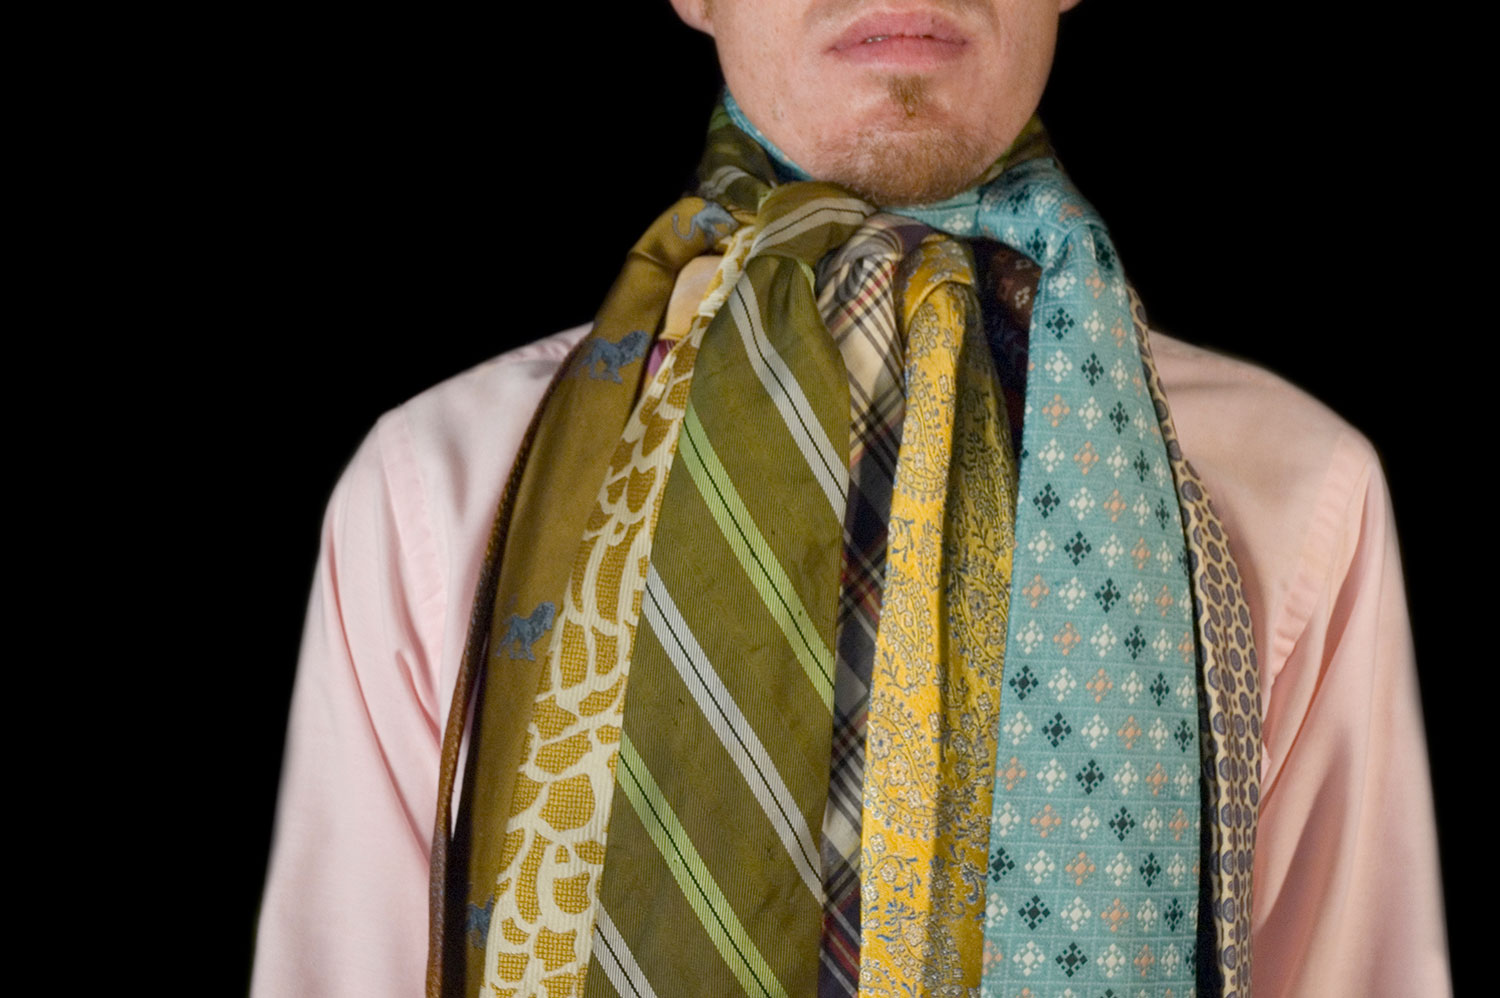 Formalism, 2006, color digital print, 20 x 16, showing 1 of 32<br><br>I tie 30 neckties around my neck according to the formal structure of ROY G BIV.